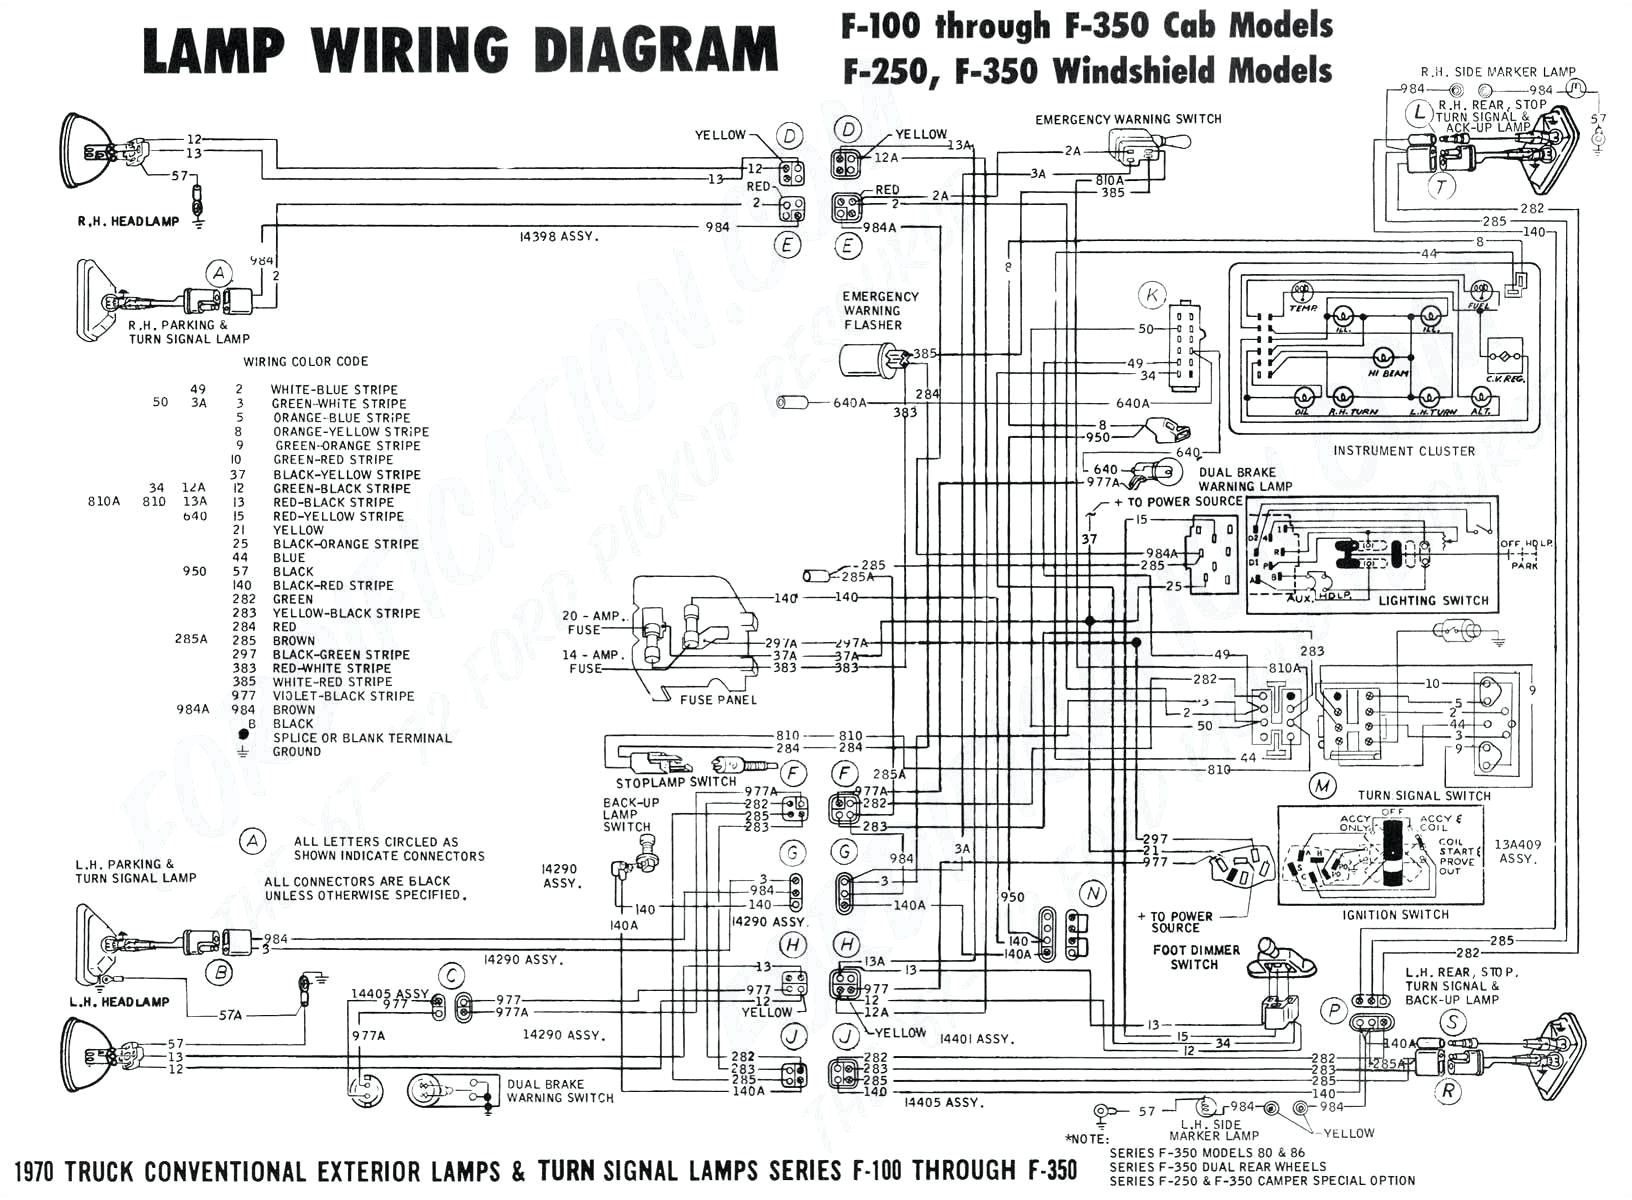 Wiring Diagram for Utility Trailer Wiring Harness Vt600cd2005 Wiring Diagram Database